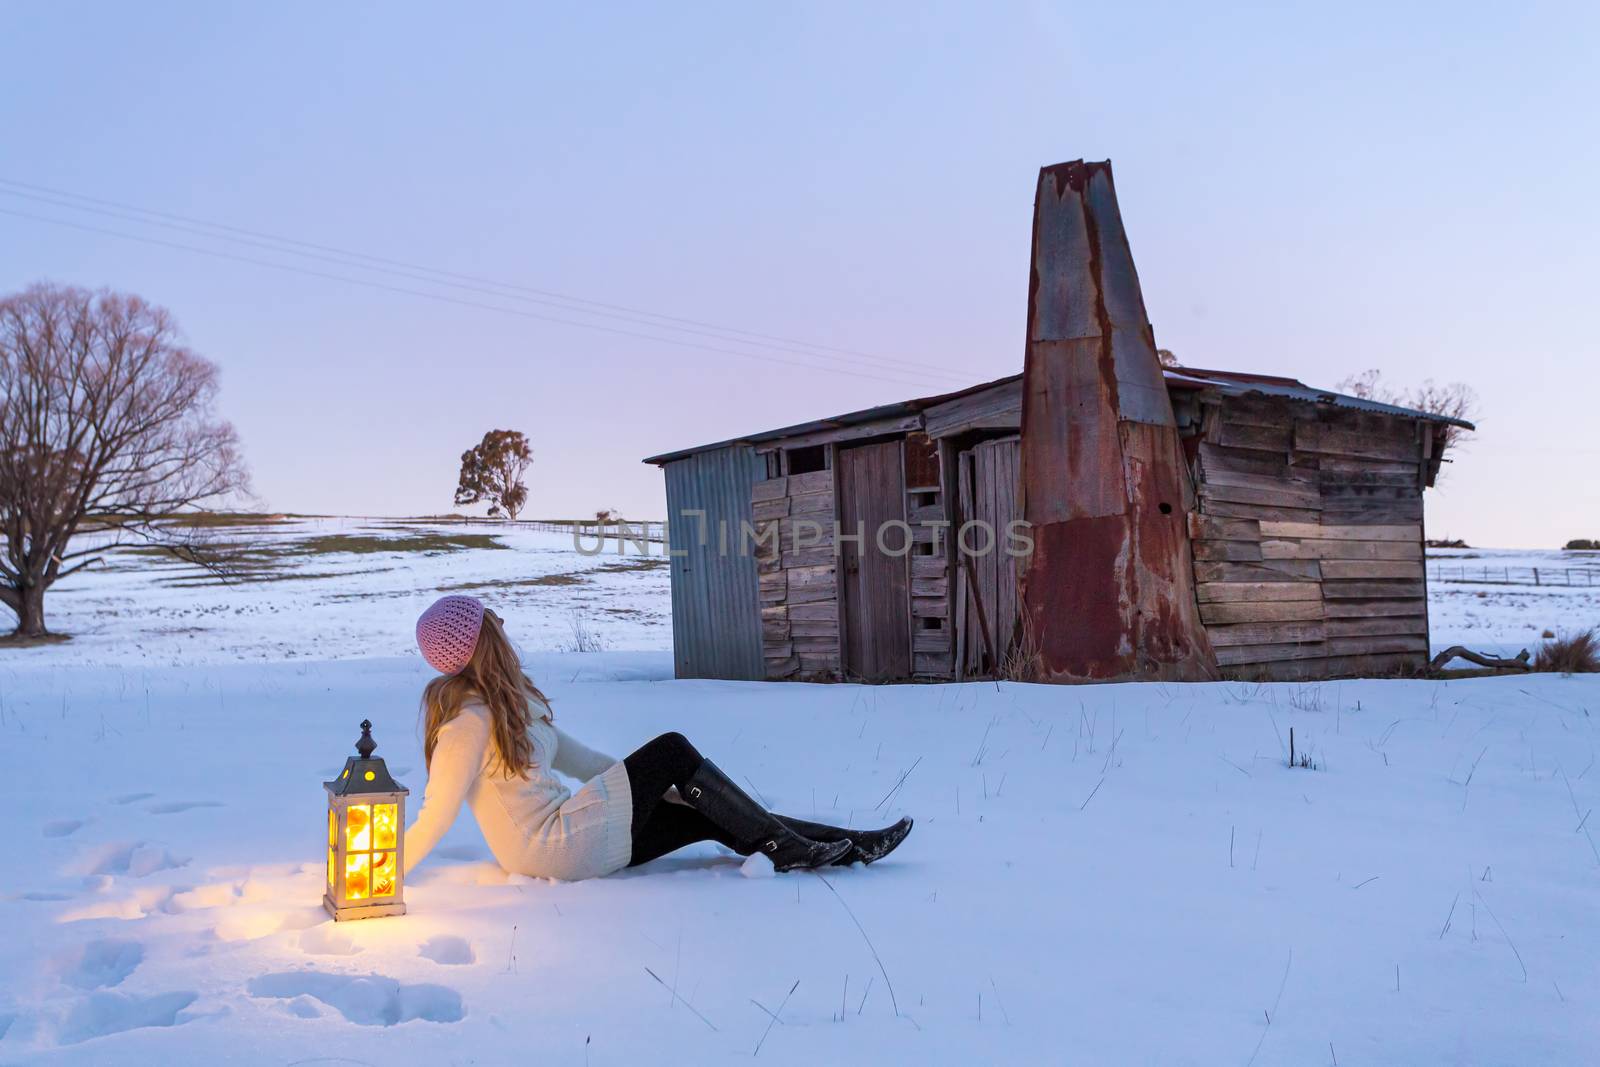 Woman with lantern sitting in a snow covered rural field with rustic barn shed by lovleah